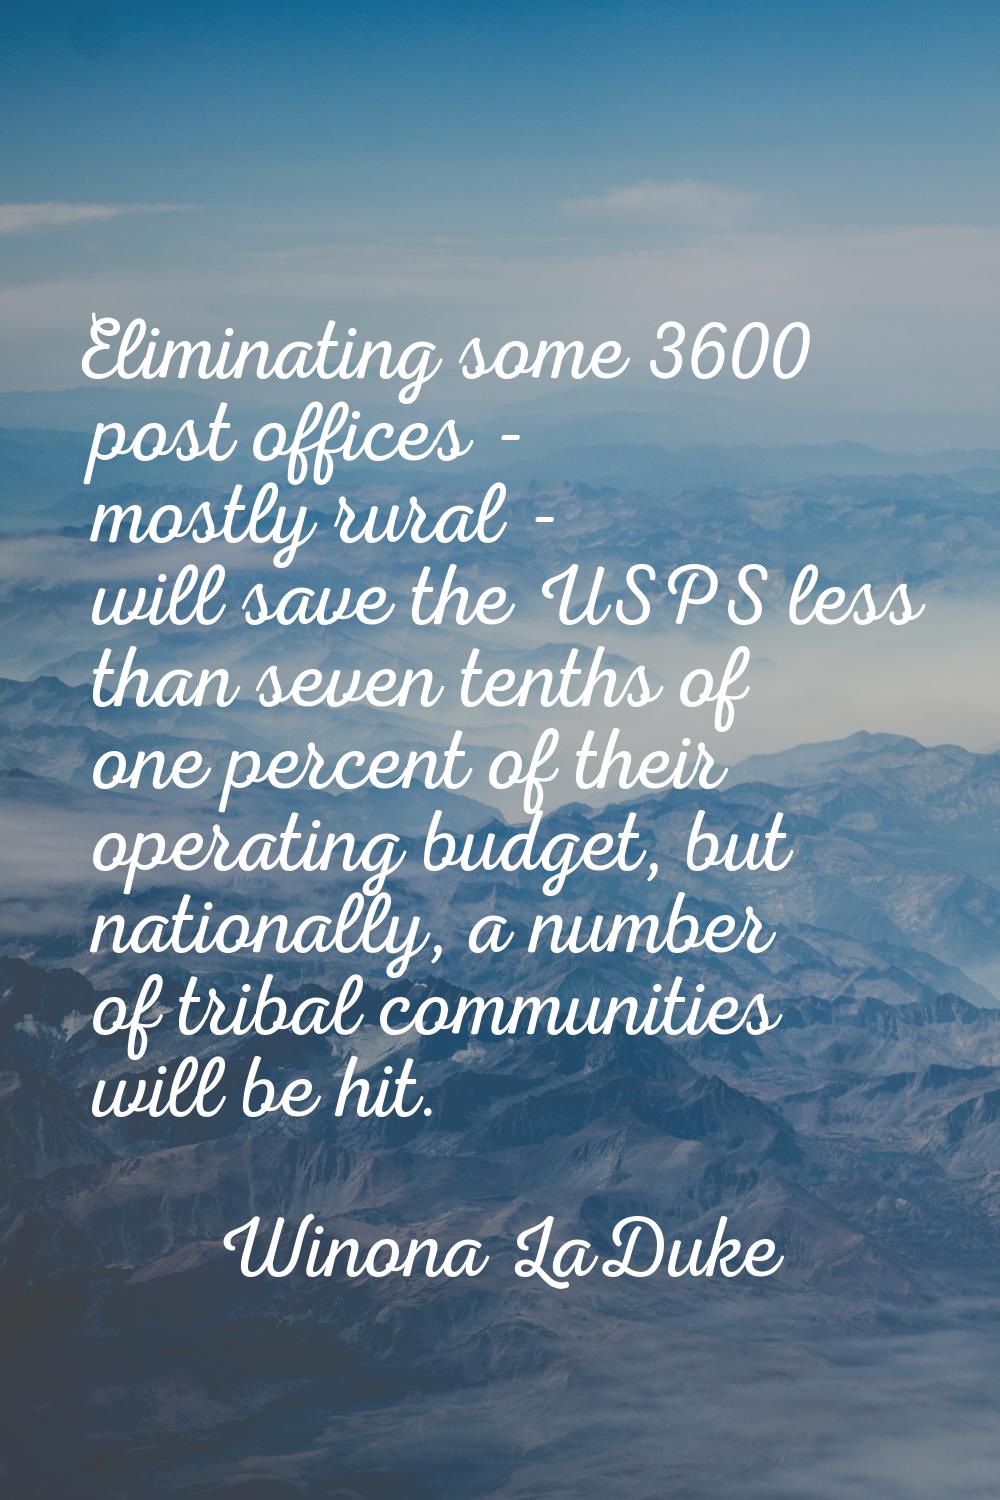 Eliminating some 3600 post offices - mostly rural - will save the USPS less than seven tenths of on